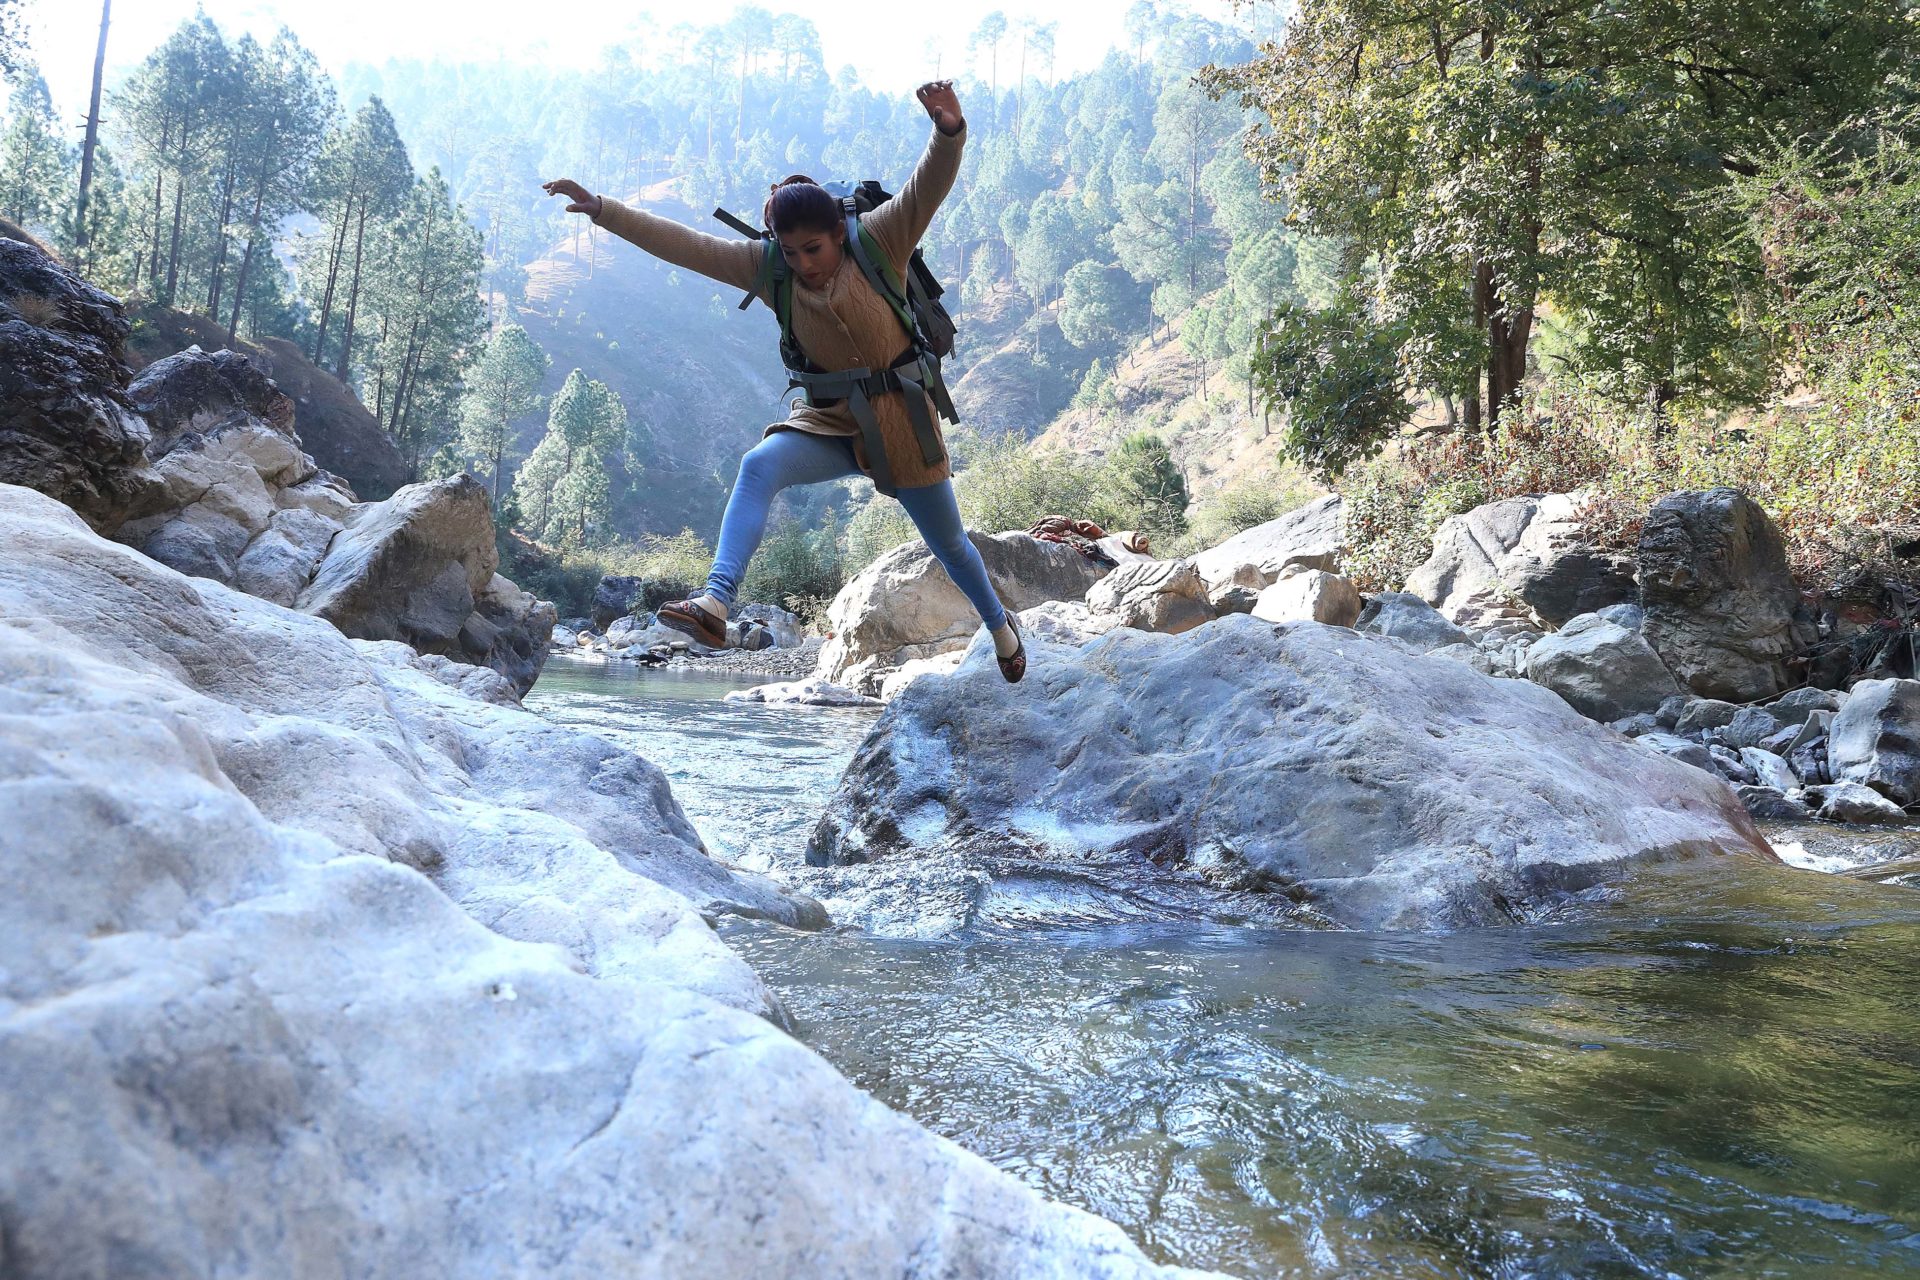 a Nepalese woman with her arms out in a U shape, one leg toward the rock she's aiming for and one leg in the direction from whence she jumped has a hiking backpack strapped to her back and is in mid-air of a jump across a fast moving river.